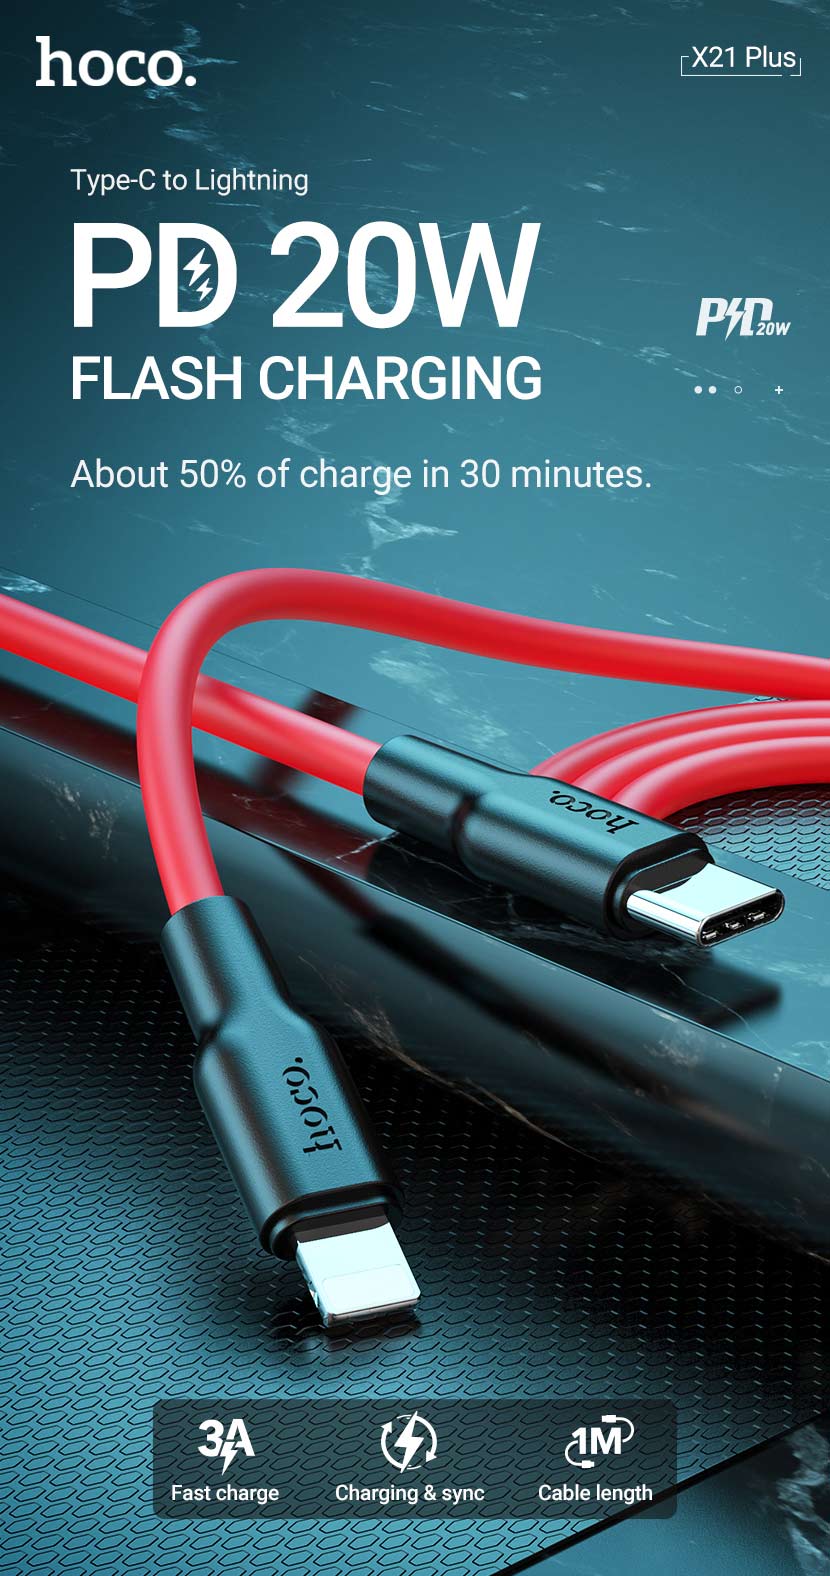 hoco news x21 plus silicone pd charging data cable en